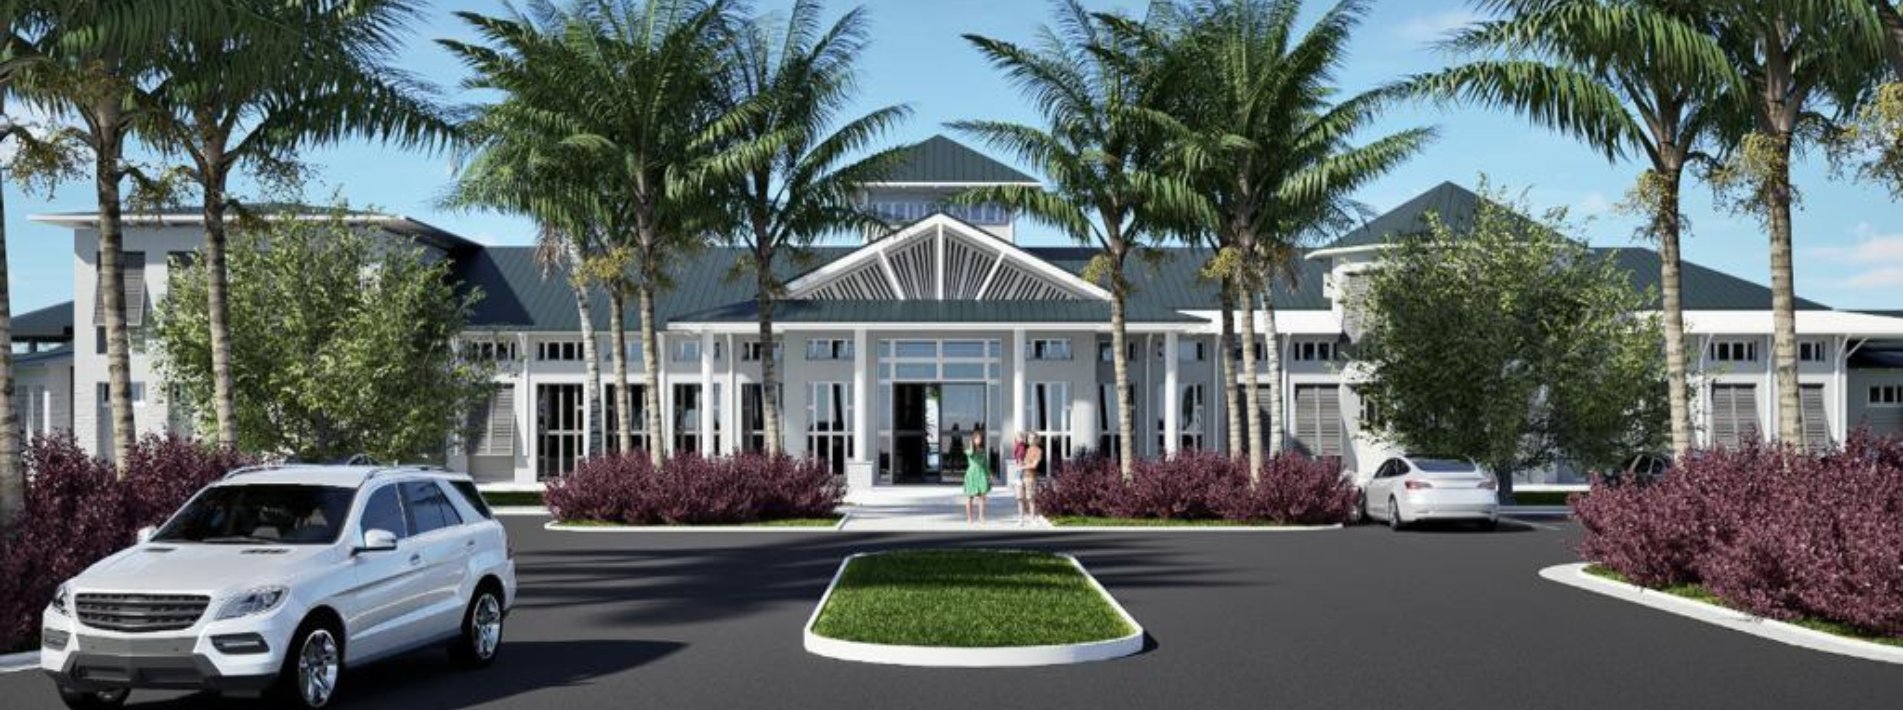 Windsor Cay Orlando Investment Homes